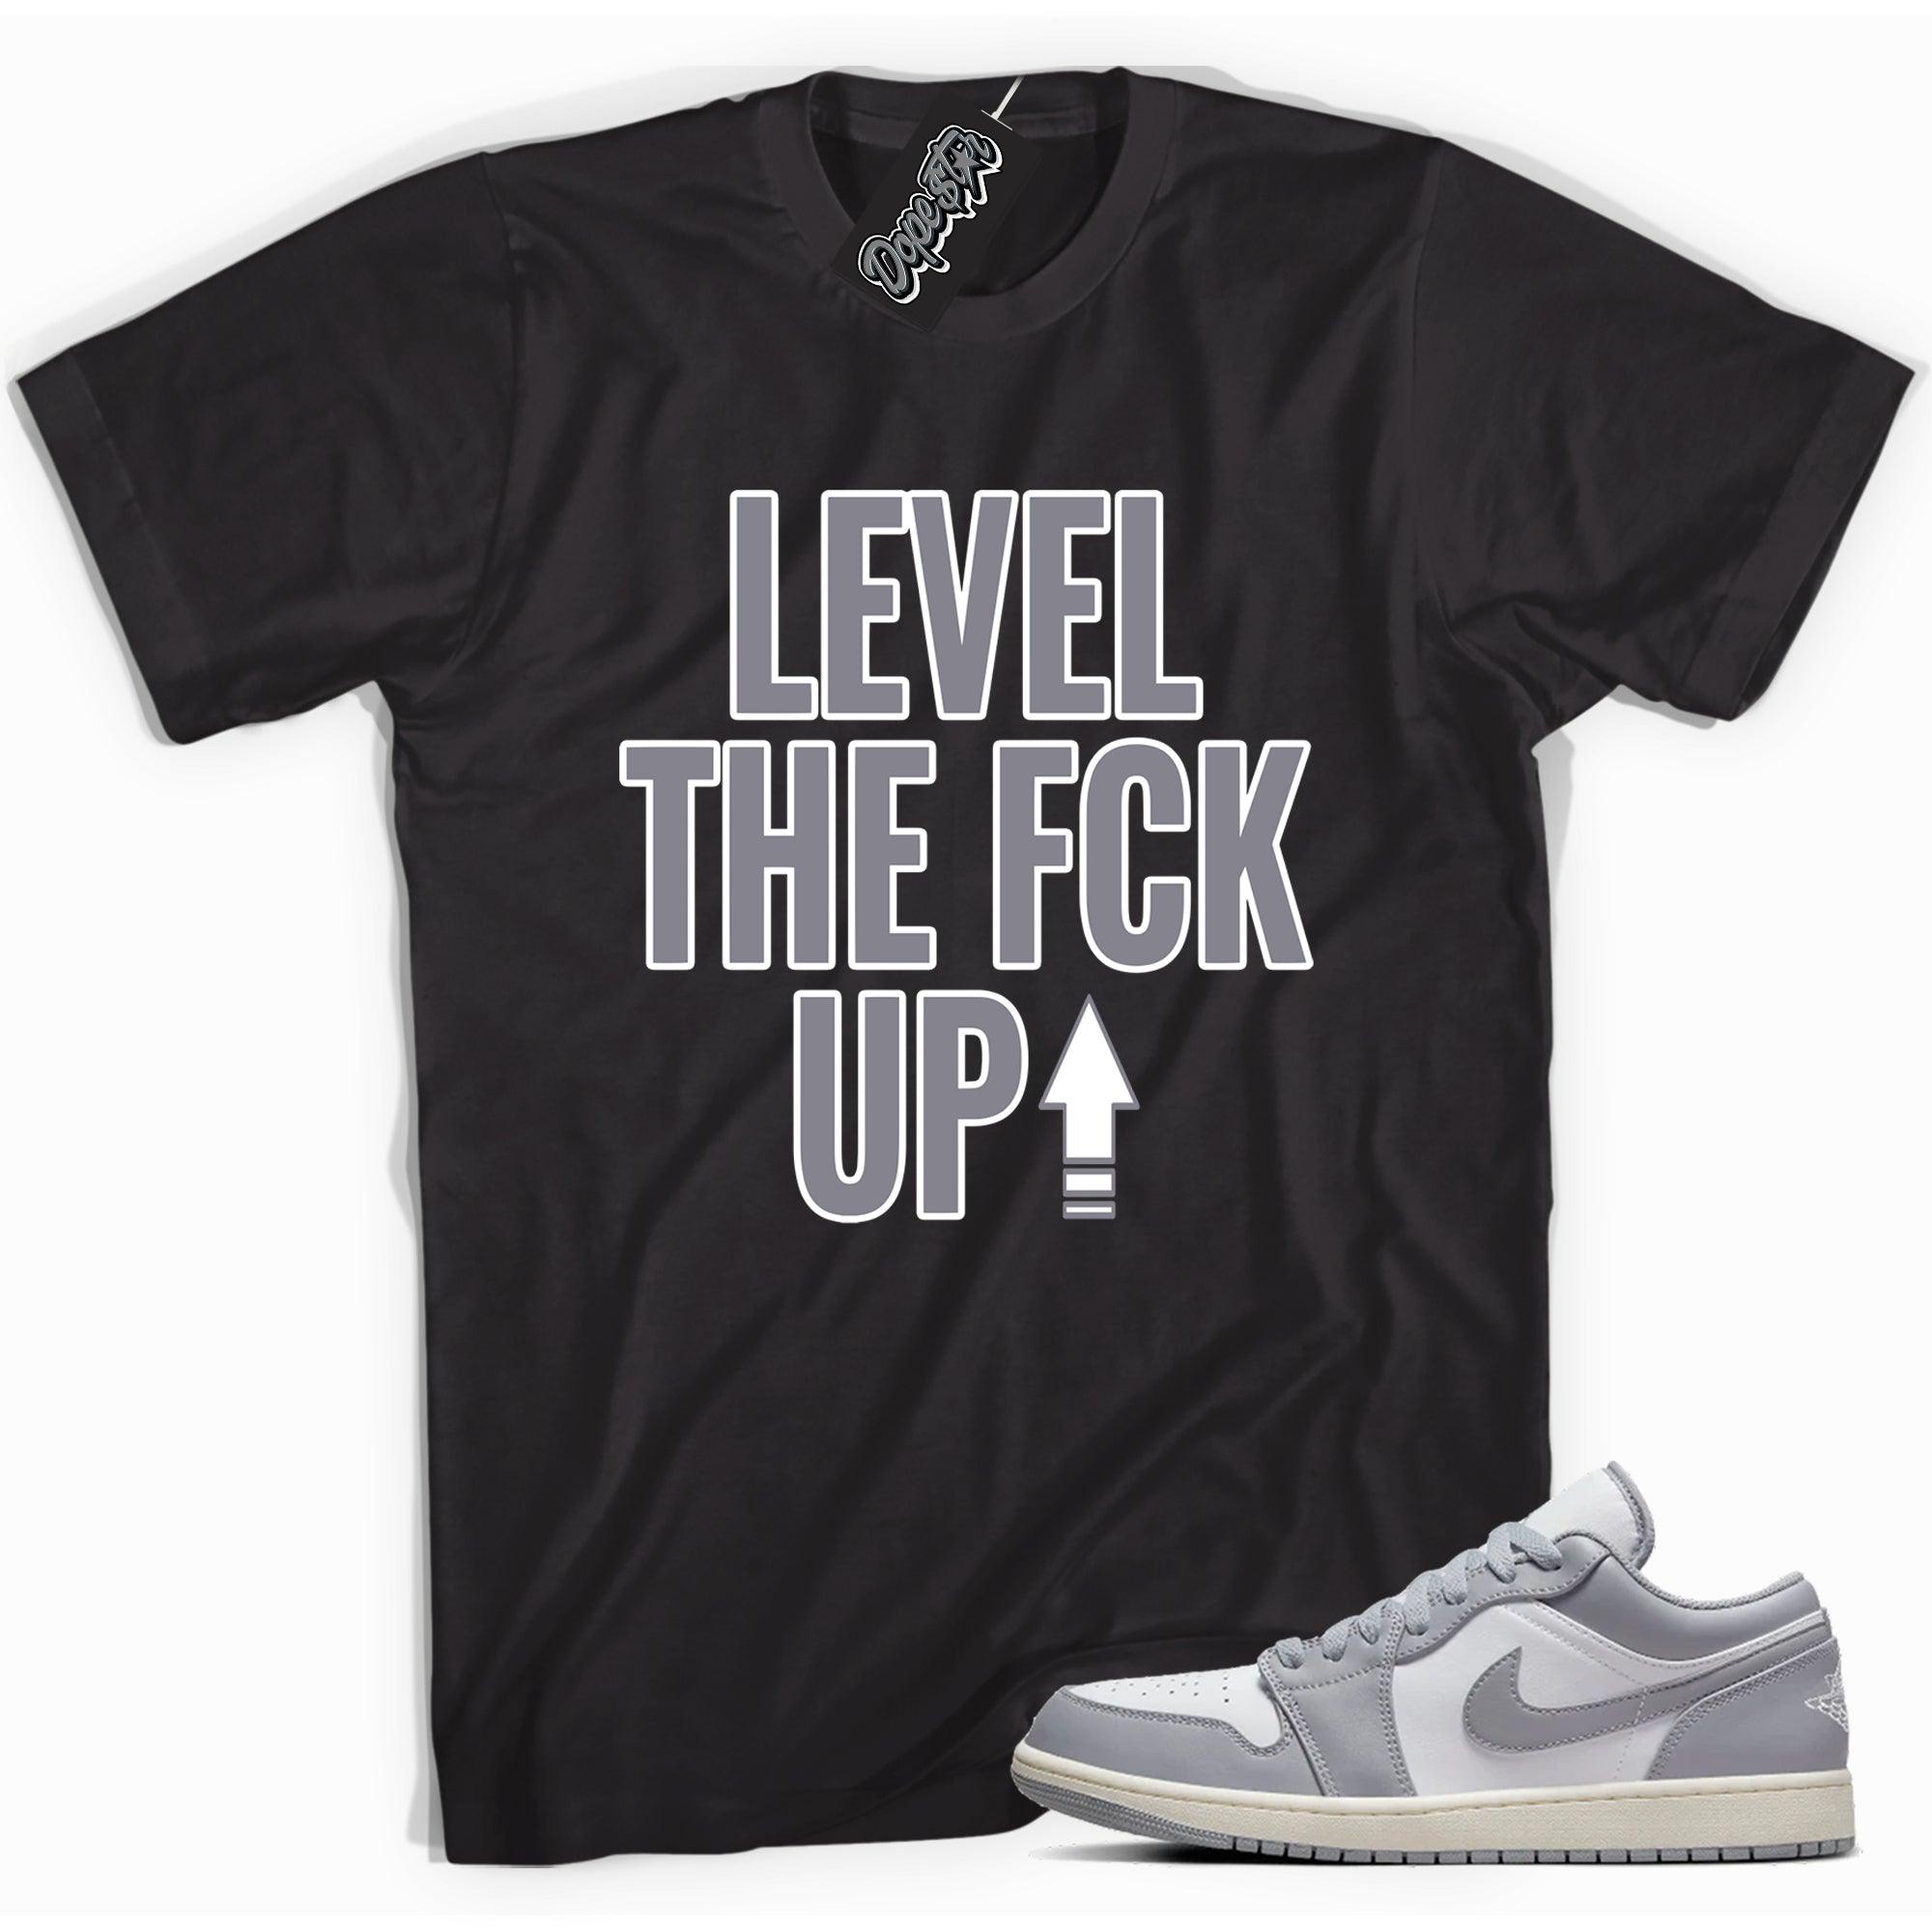 Cool black graphic tee with 'Level Up' print, that perfectly matches Air Jordan 1 Low Vintage Stealth Grey sneakers.